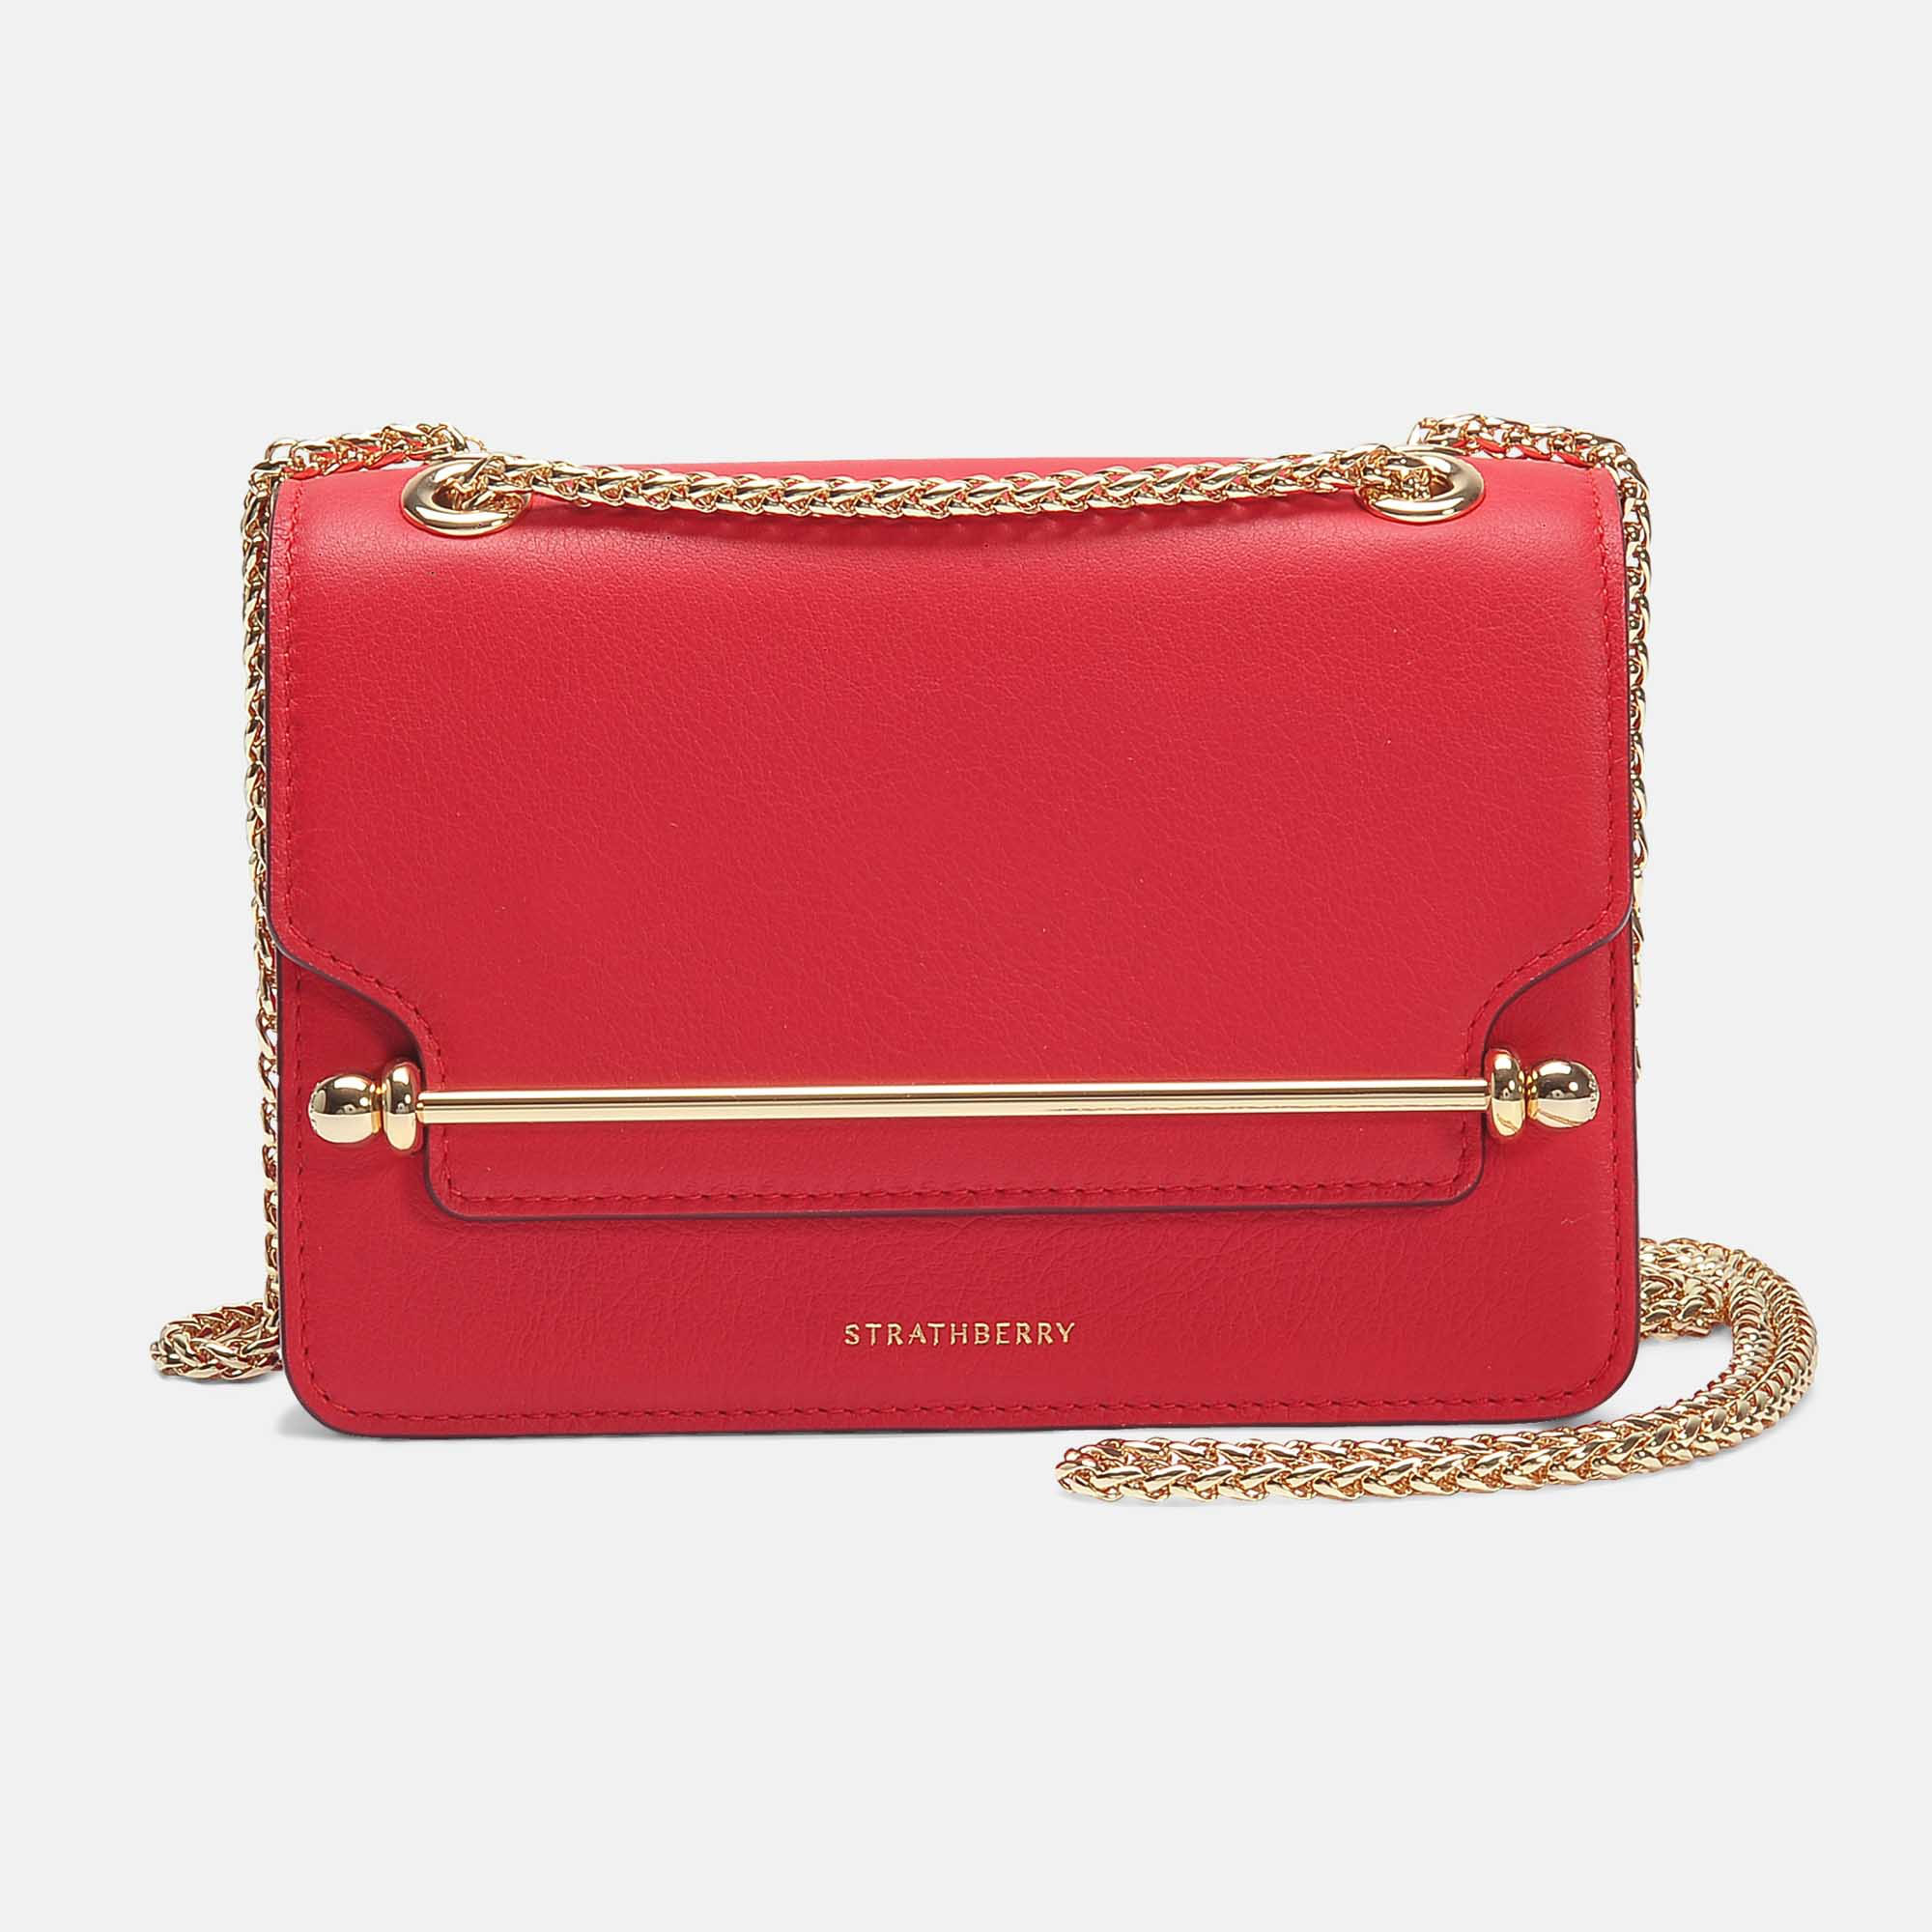 Strathberry | The East/West Mini Bag In Red | ModeSens